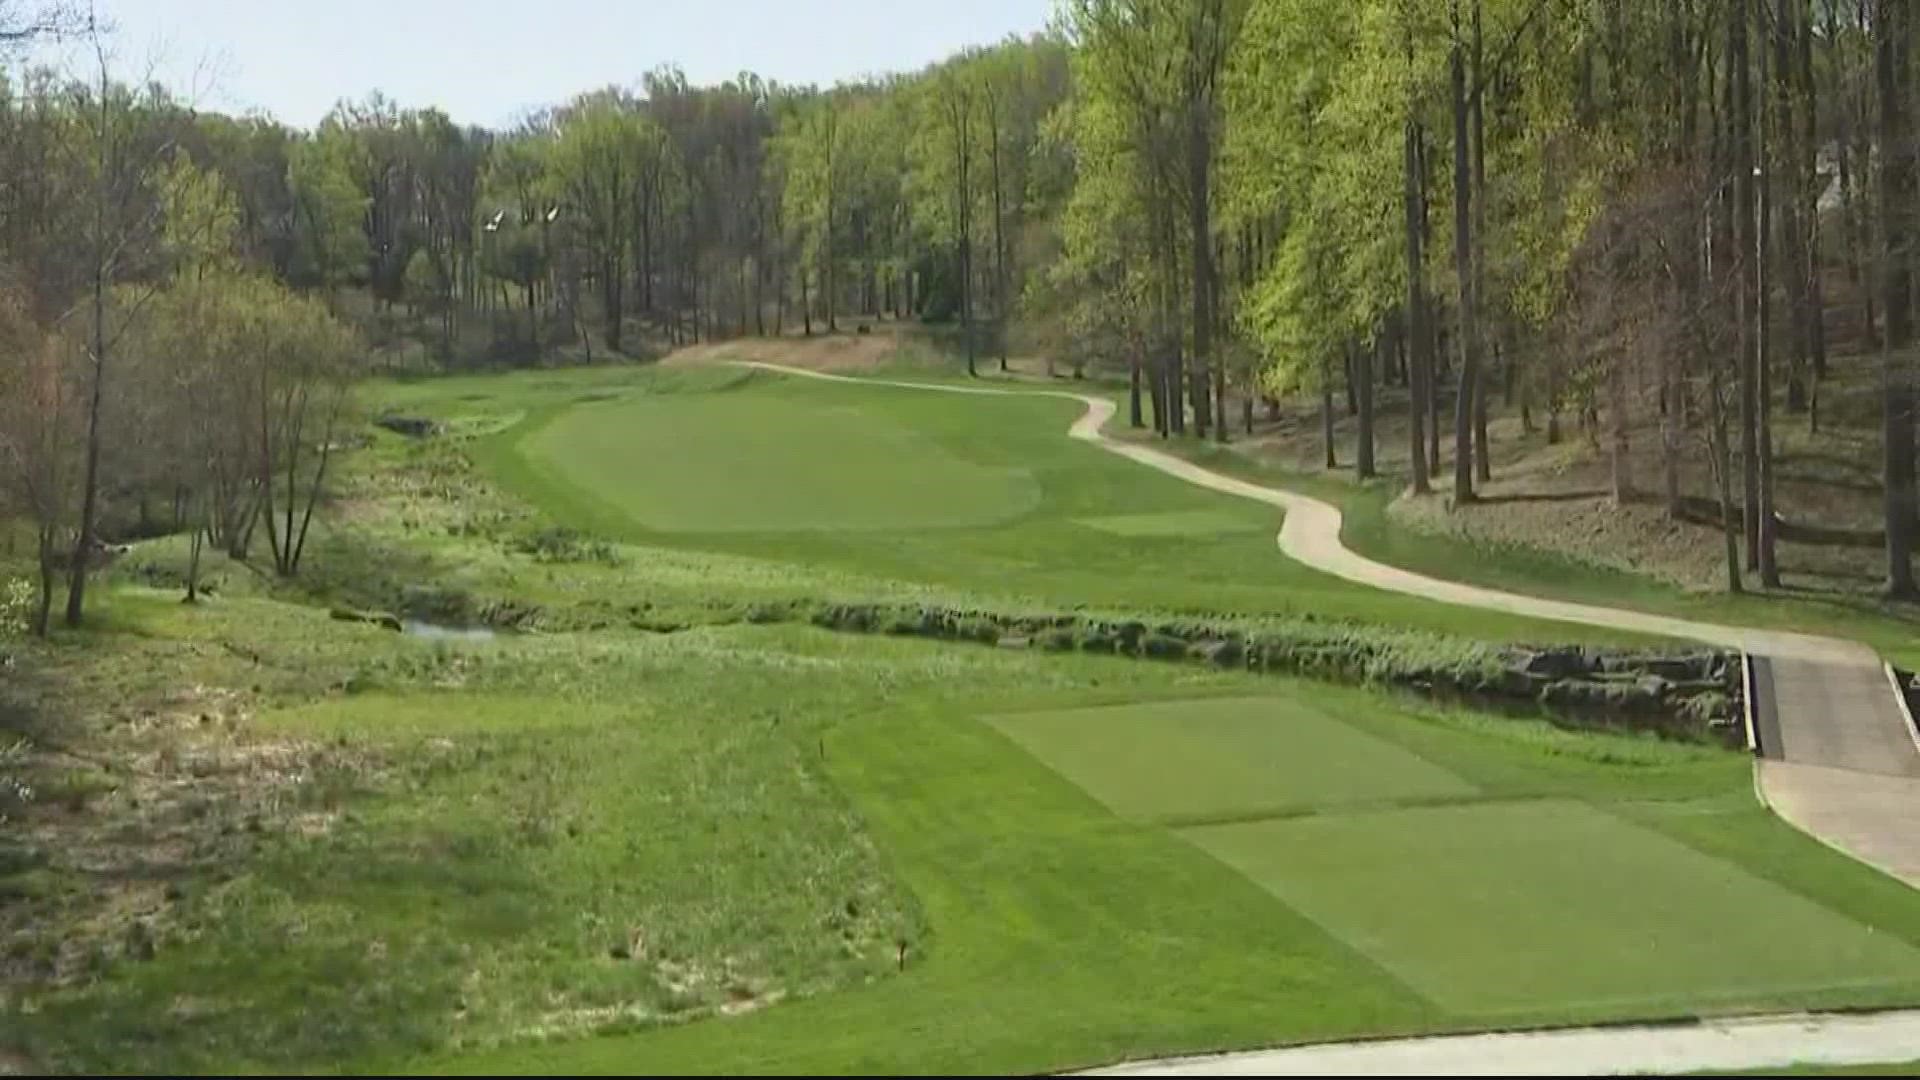 TPC Potomac at Avenel Farm is such a beautiful course, but it has been through some trials and tribulations when it comes to dealing with Mother Nature.